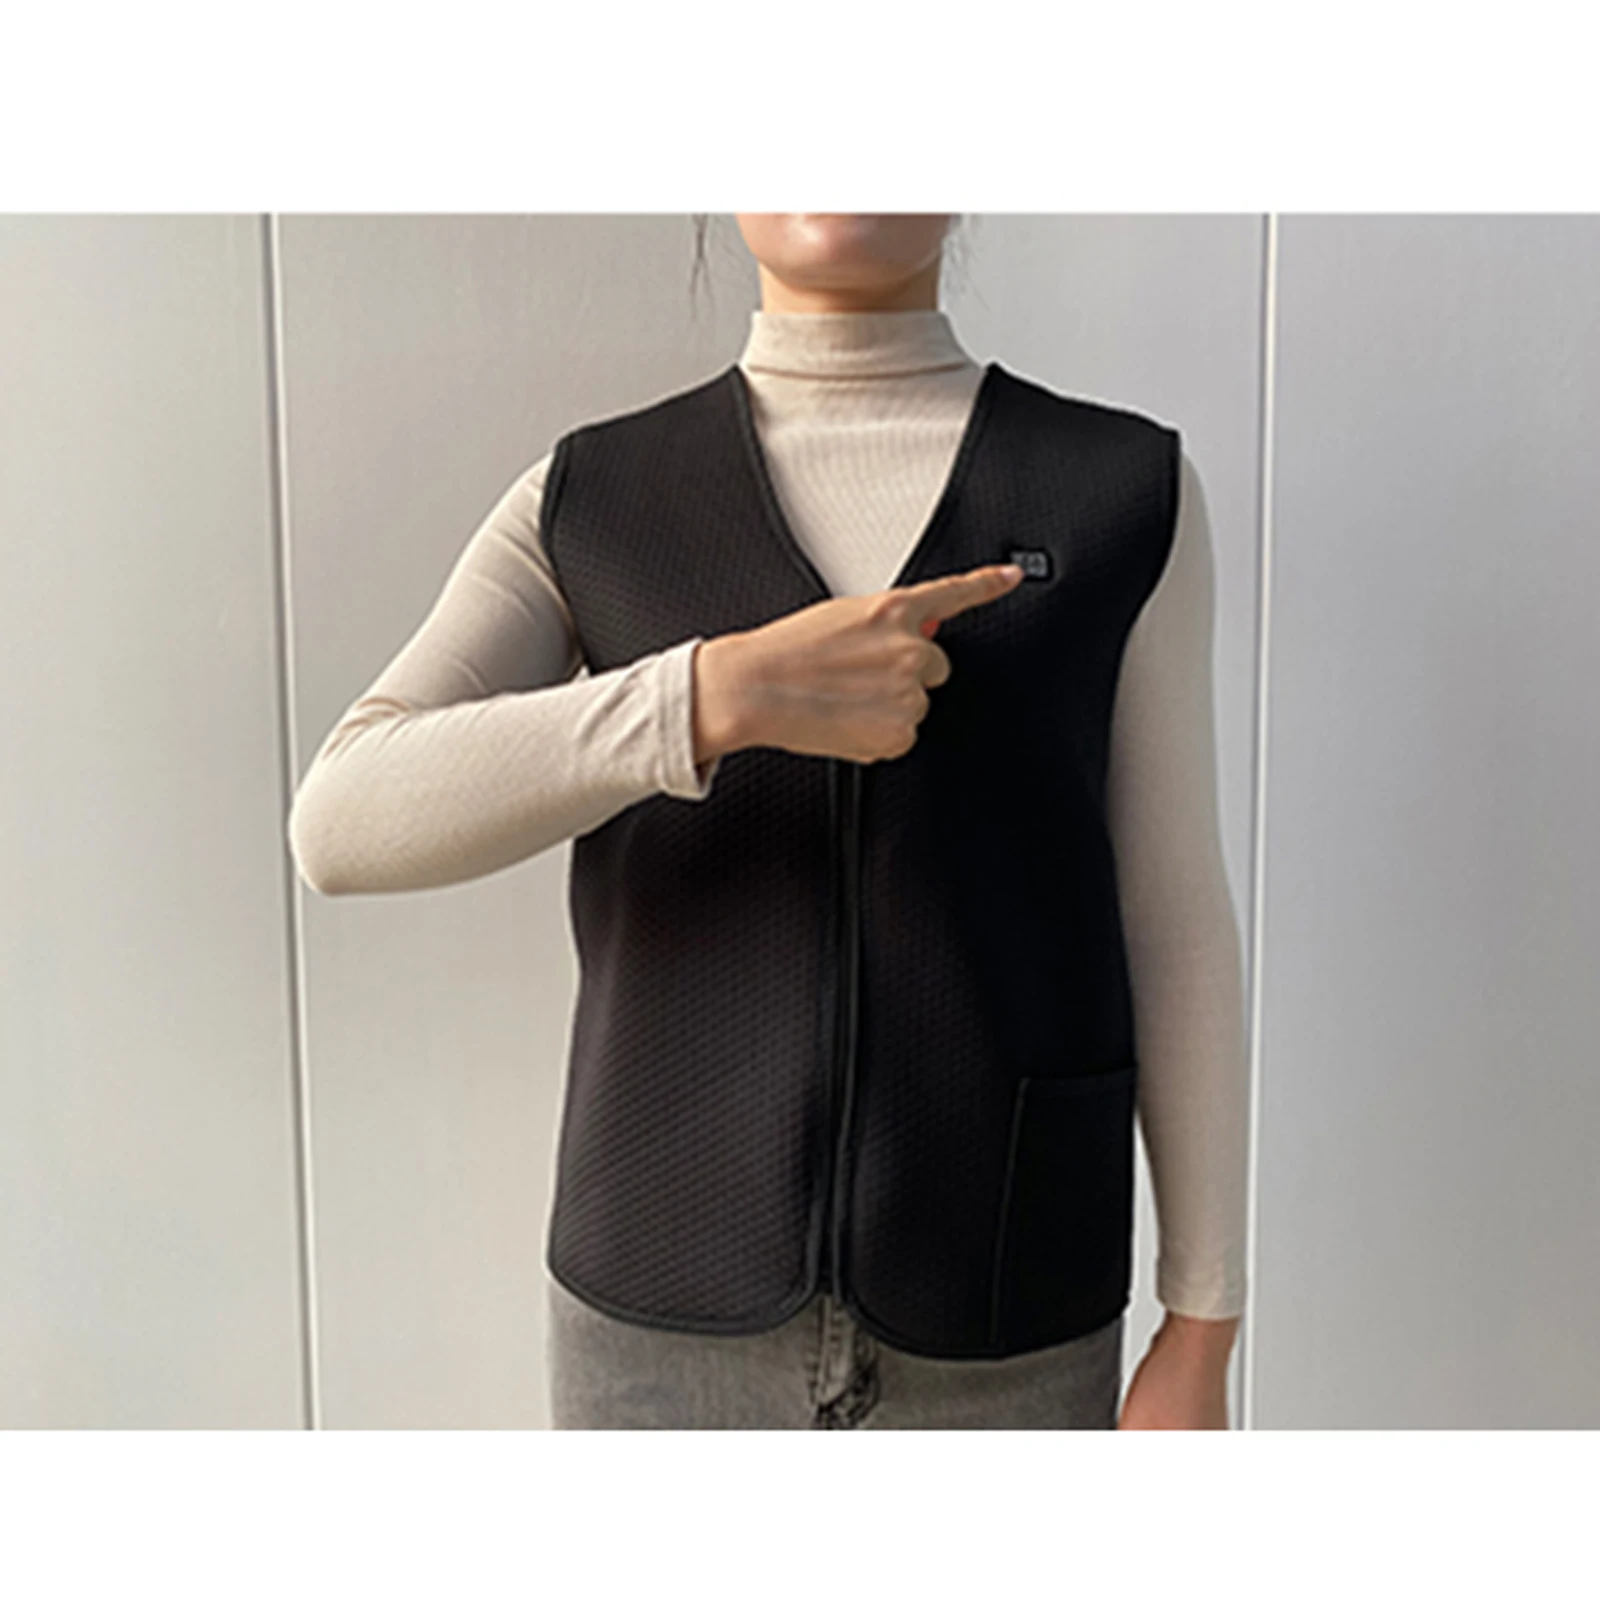 Electric Heated Vest Jacket USB Charging Vest 3-level Heating Heated Warmth, Outdoor Work, Hiking Clothes for Men and Women